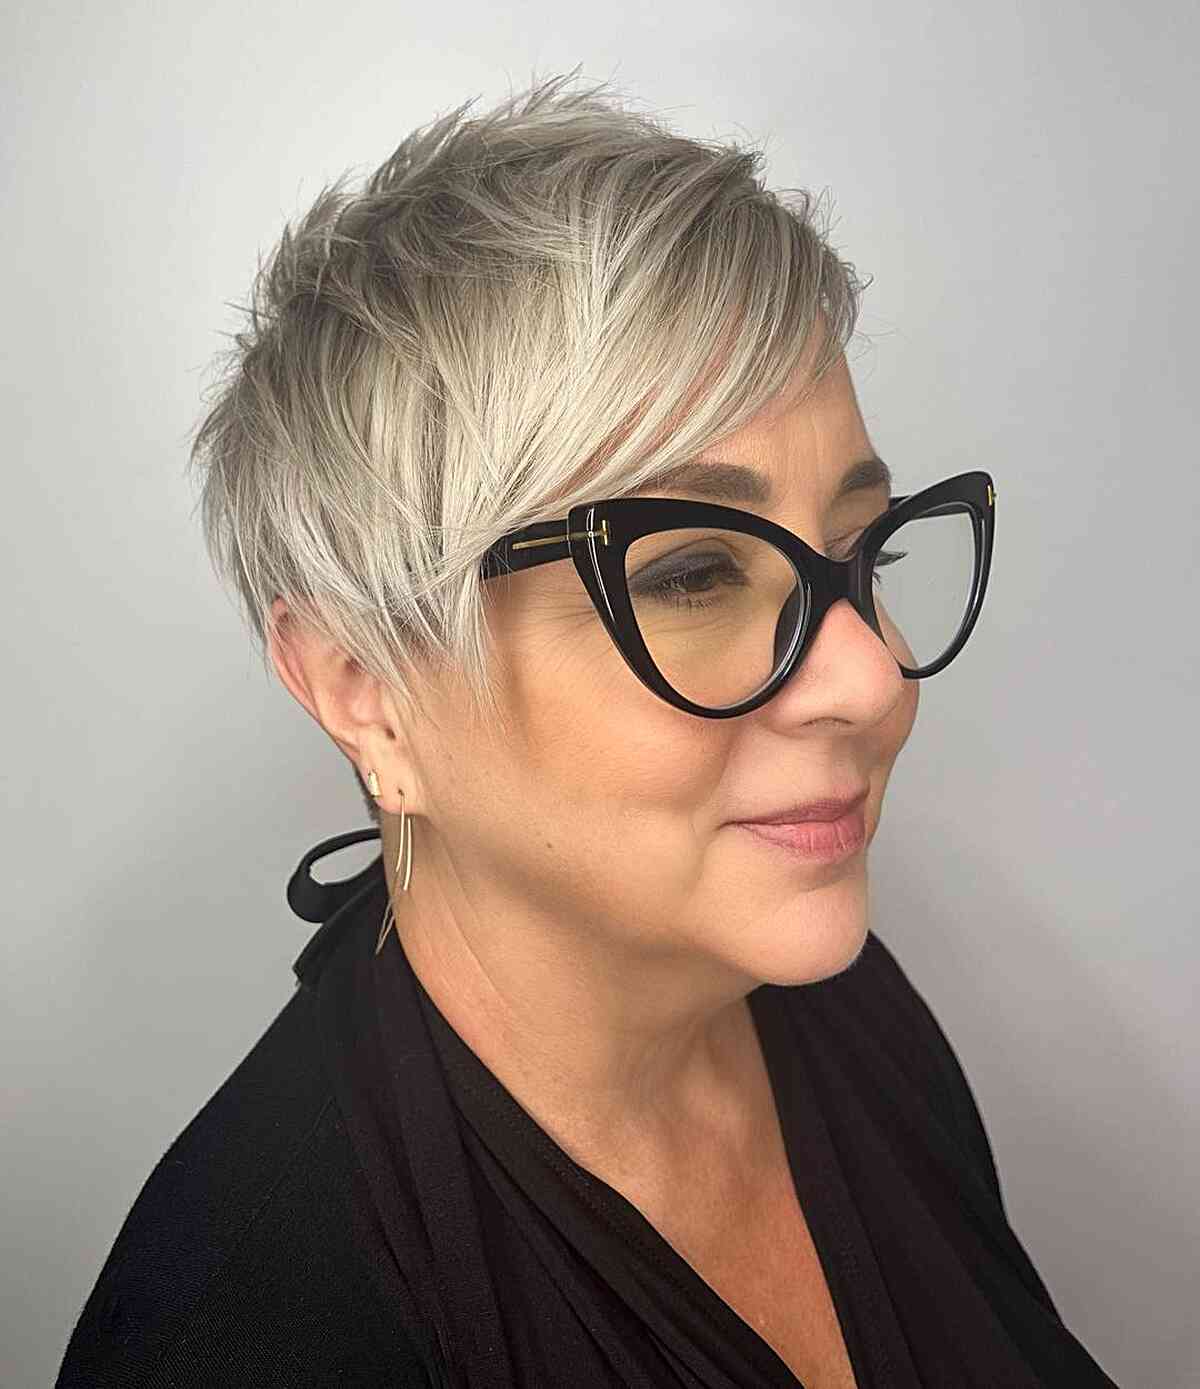 Short Messy, Straight Pixie Cut for Ladies Aged 40